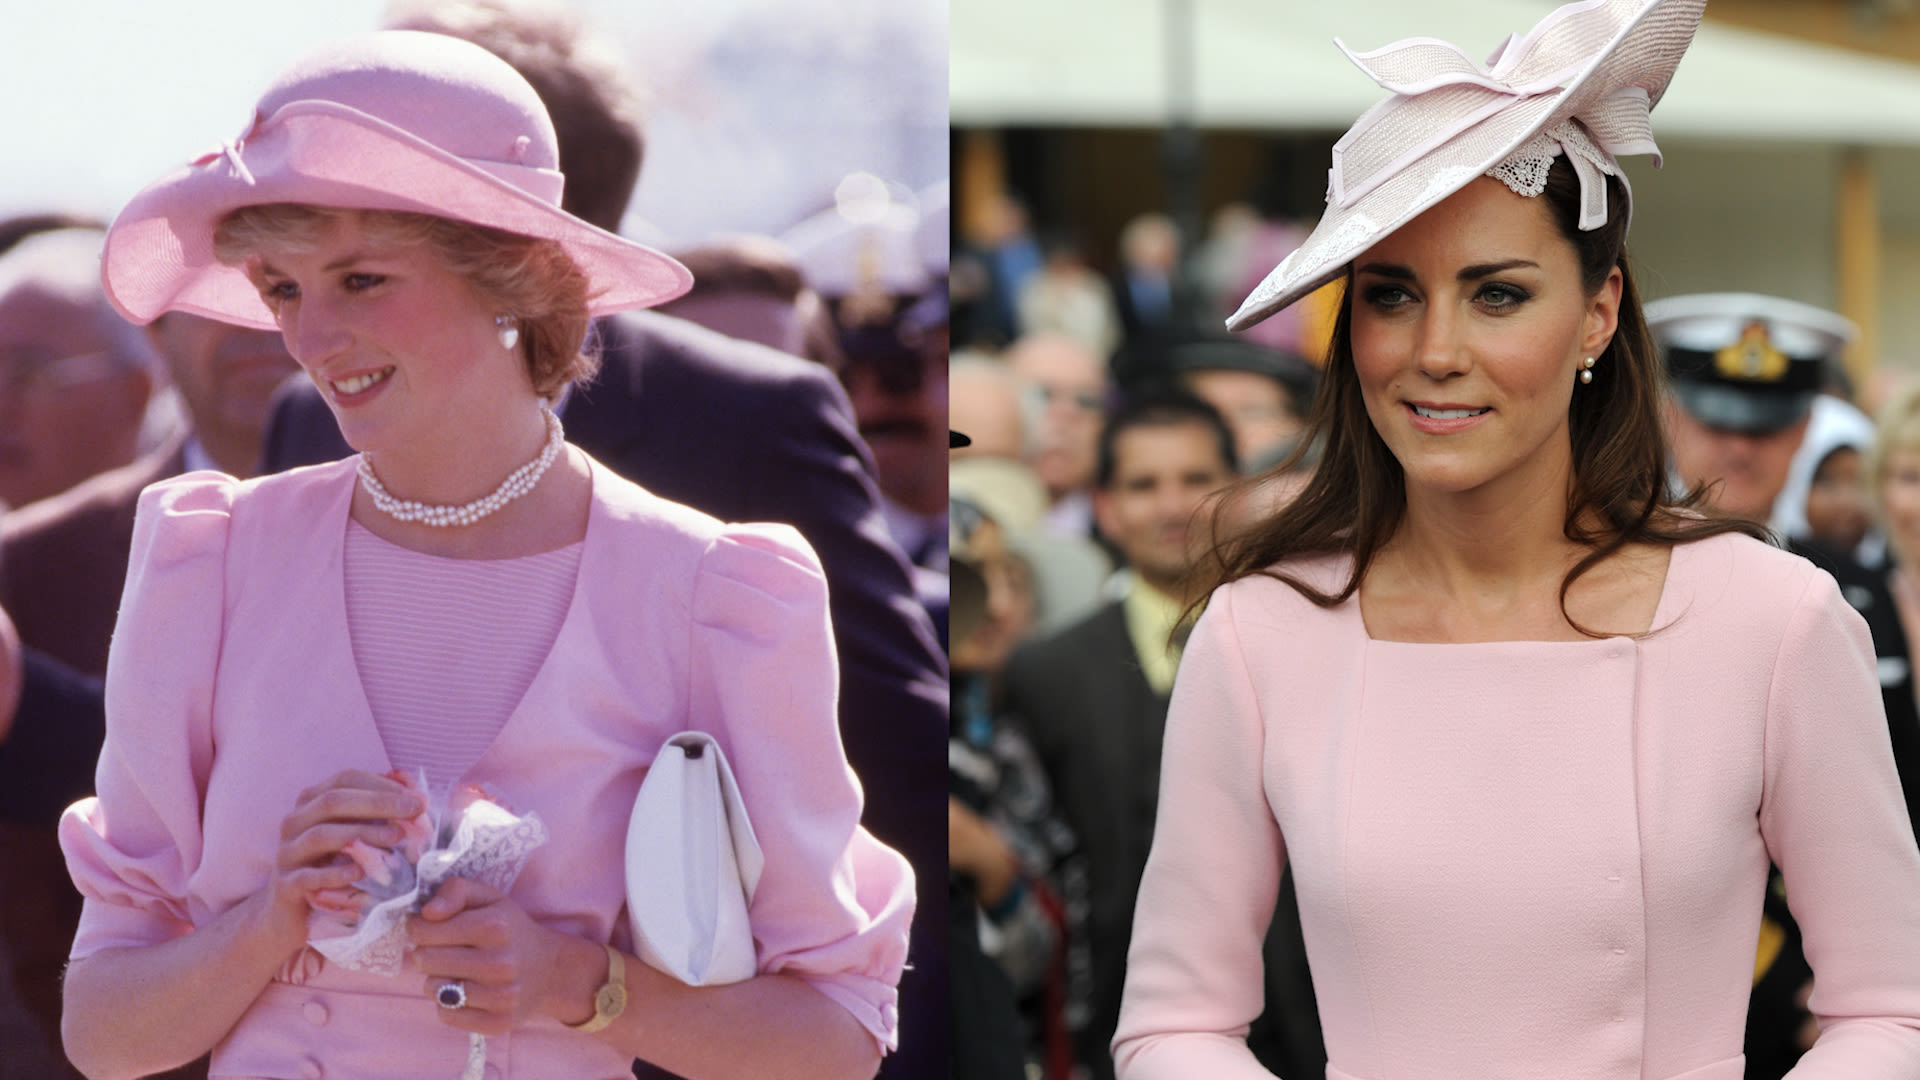 Watch Princess Diana and Kate Middleton's Style Similarities | Vanity Fair